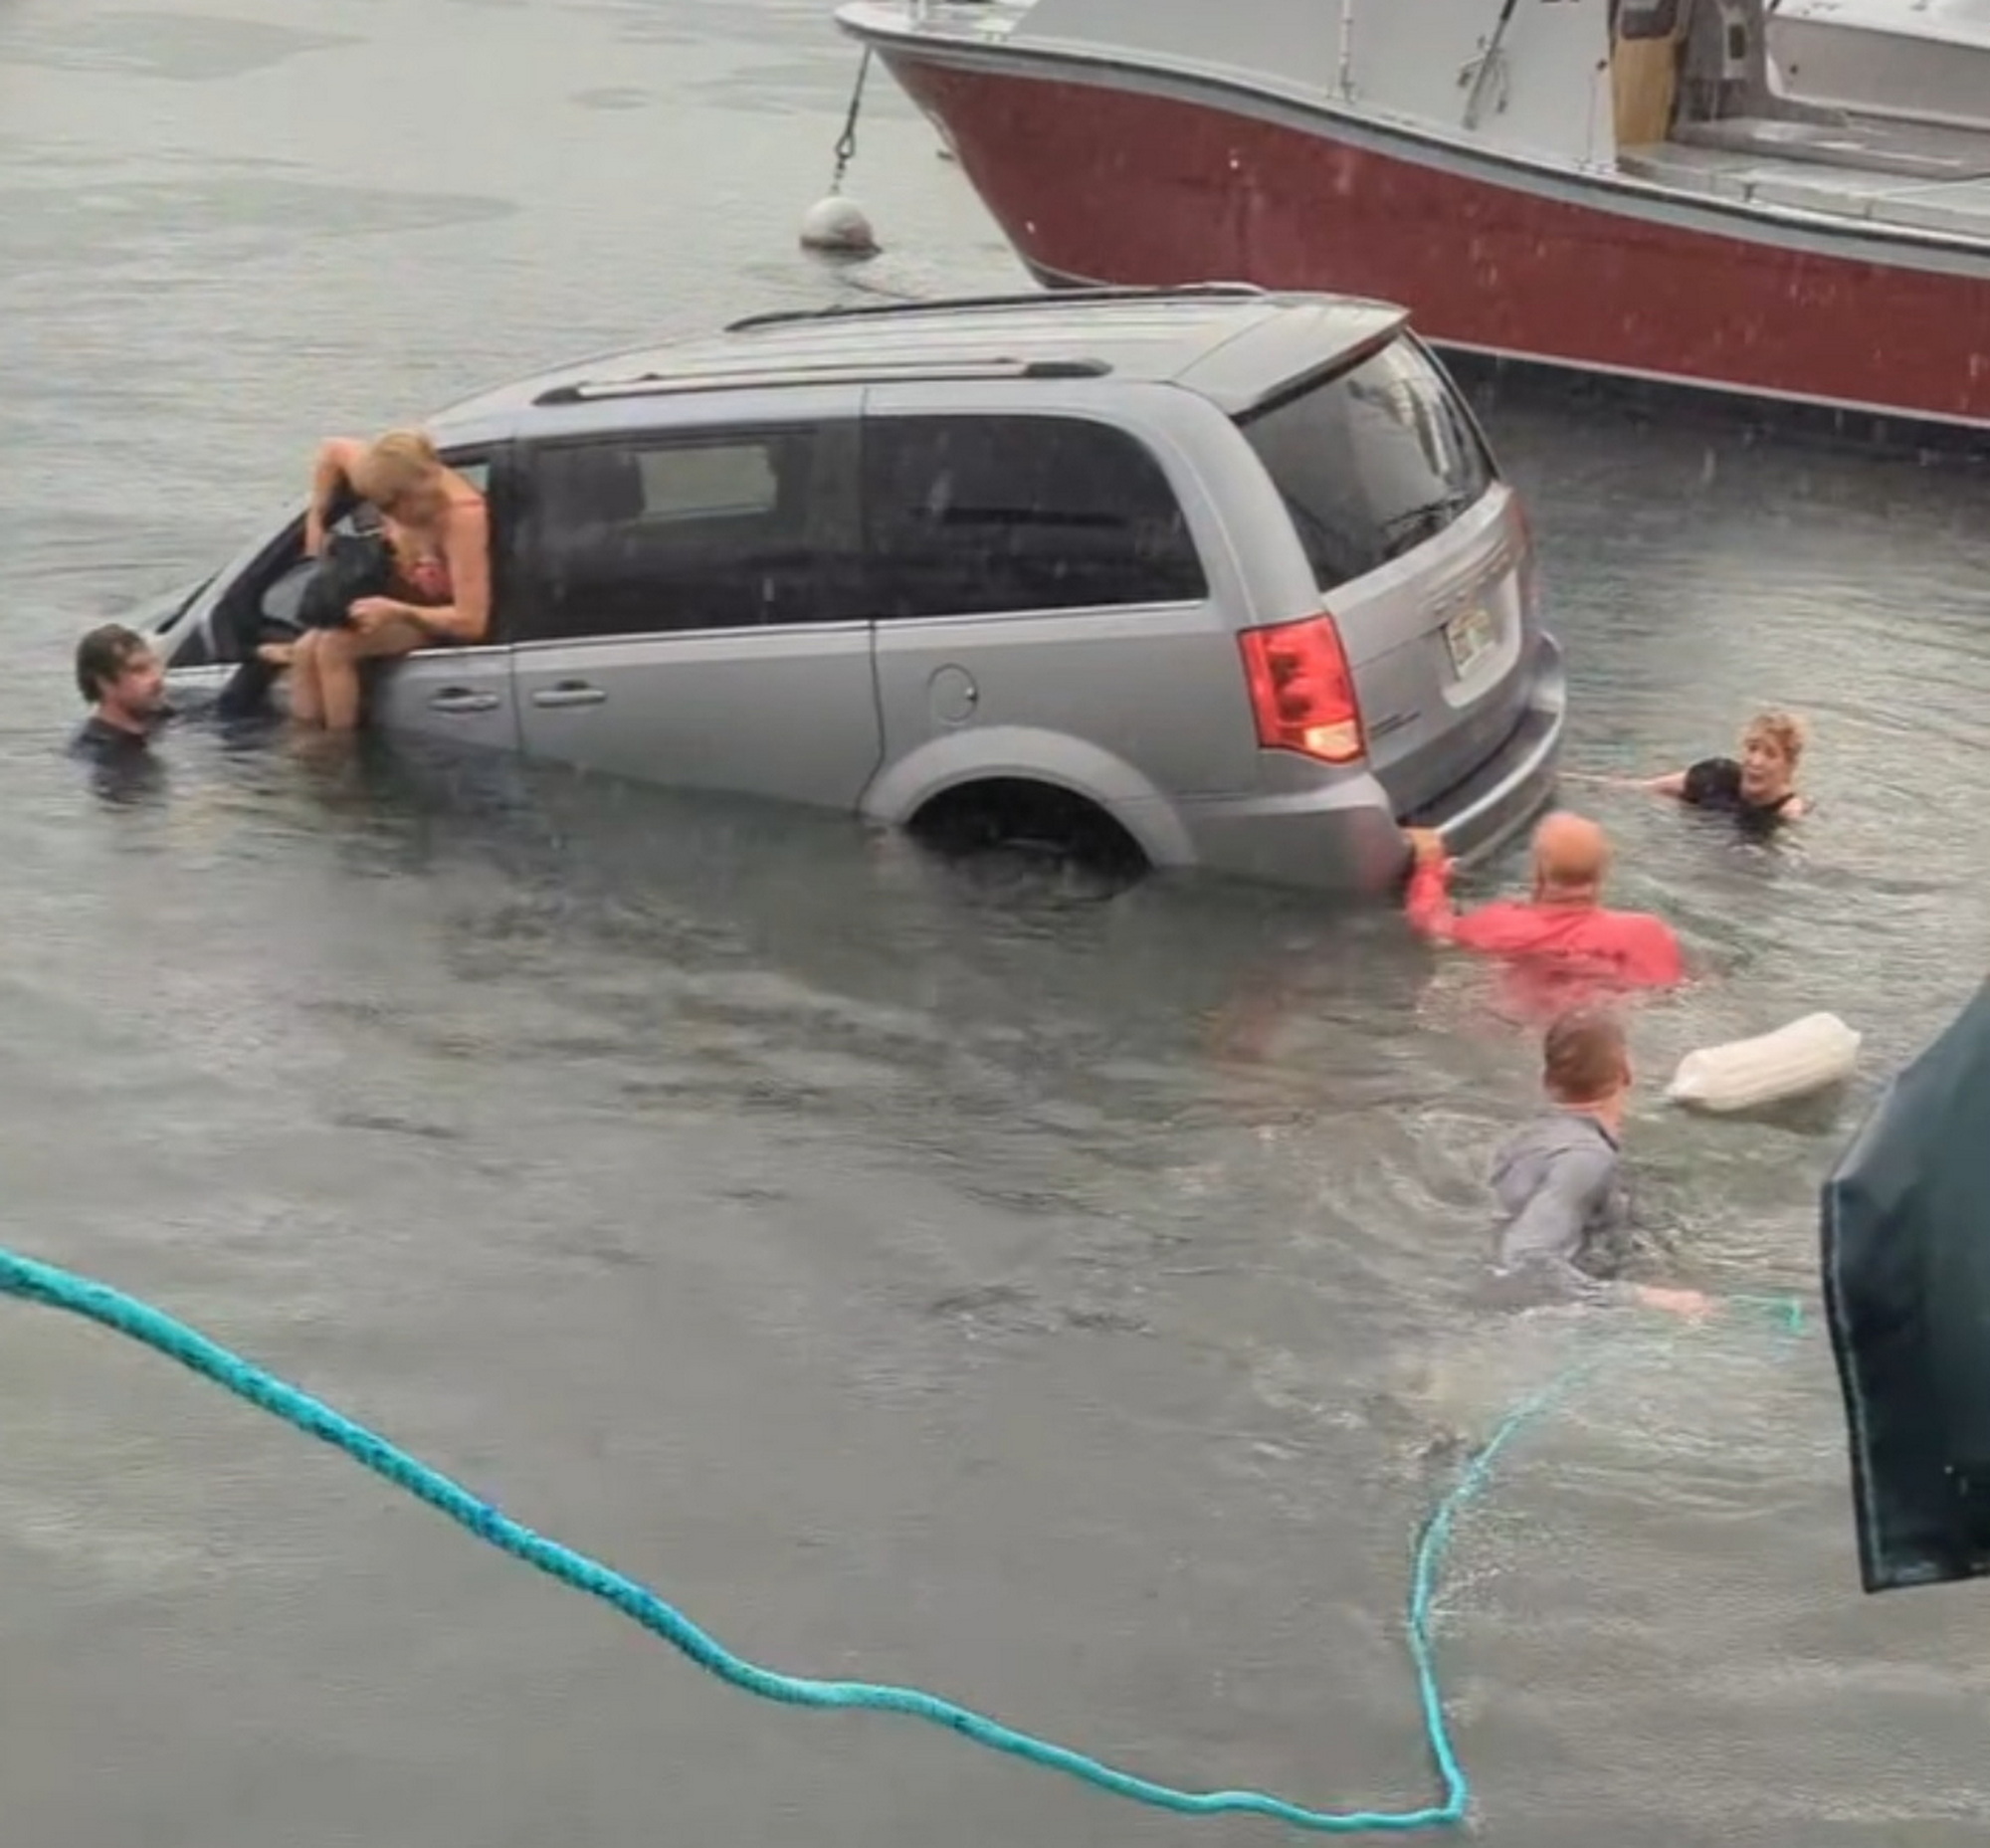 Tourists In Dodge Minivan Follow Their GPS Straight Into The Harbor | Carscoops